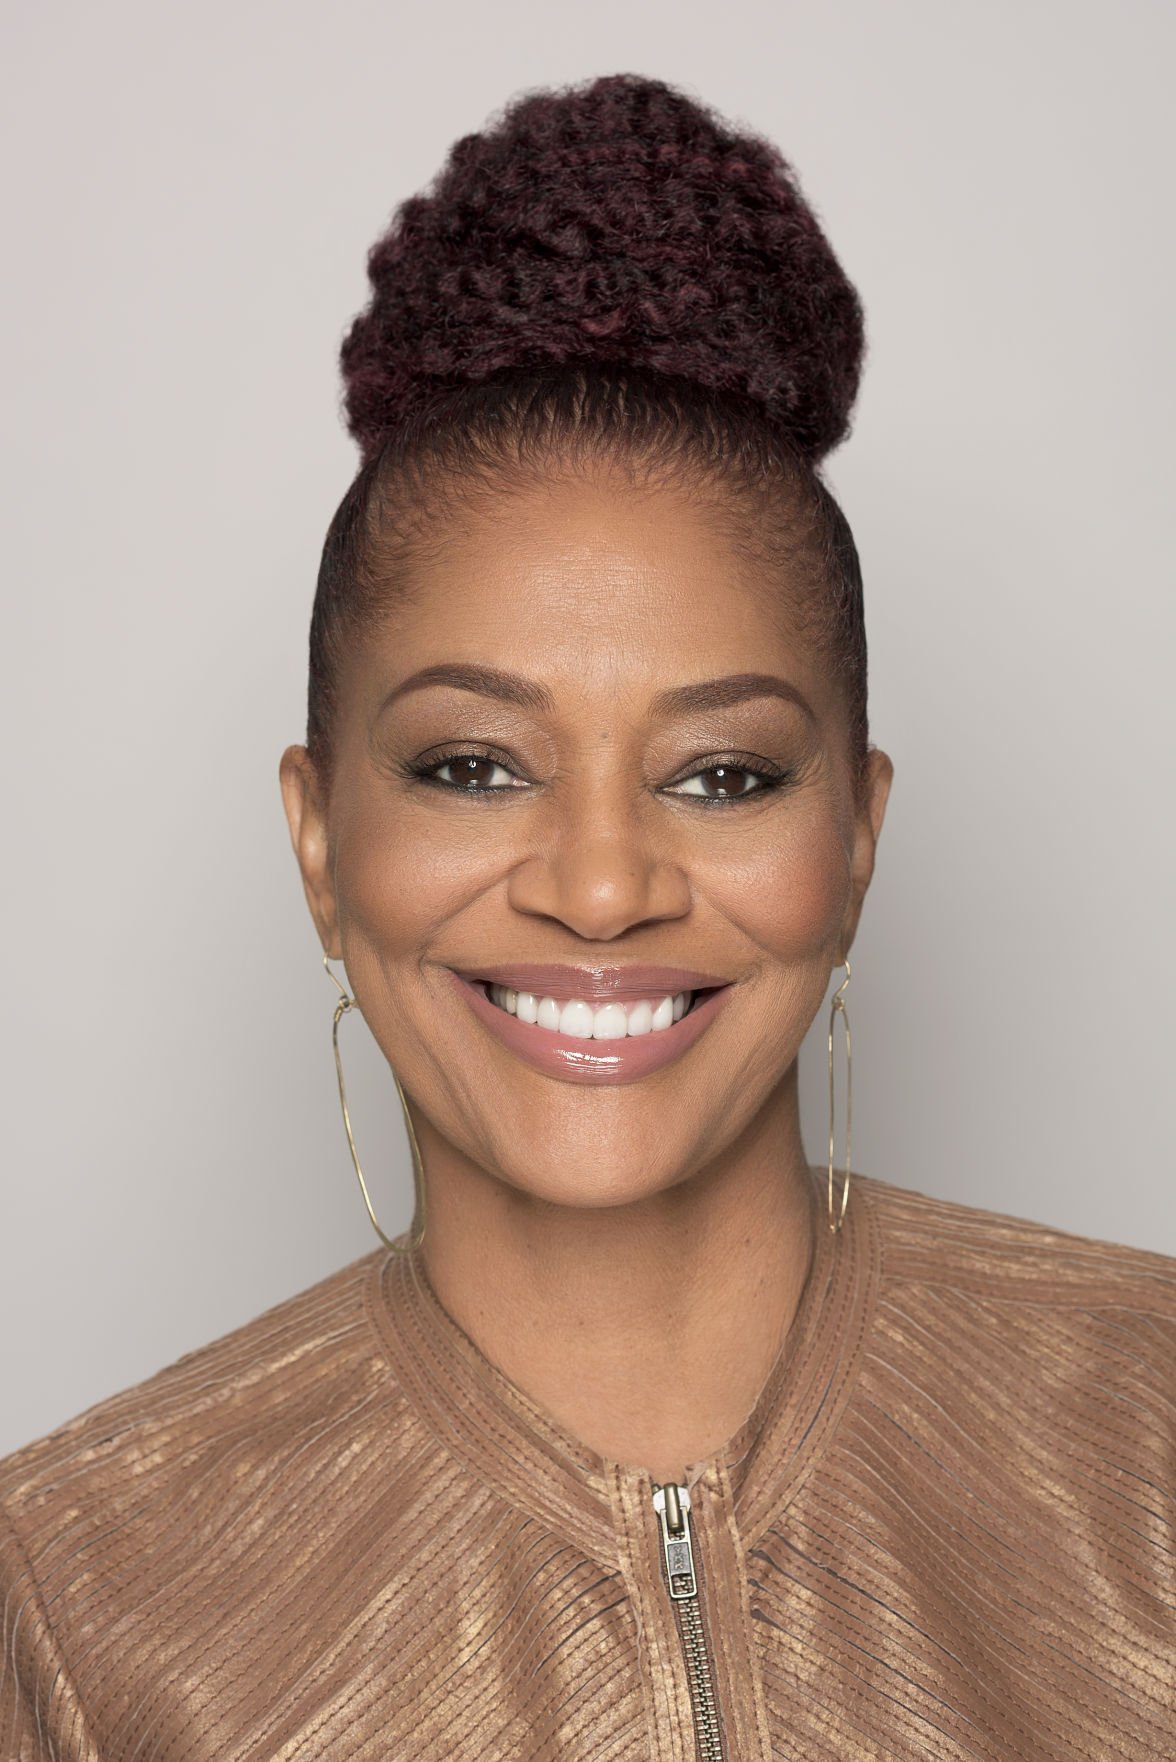 Beloved author Terry McMillan returns Lifestyle